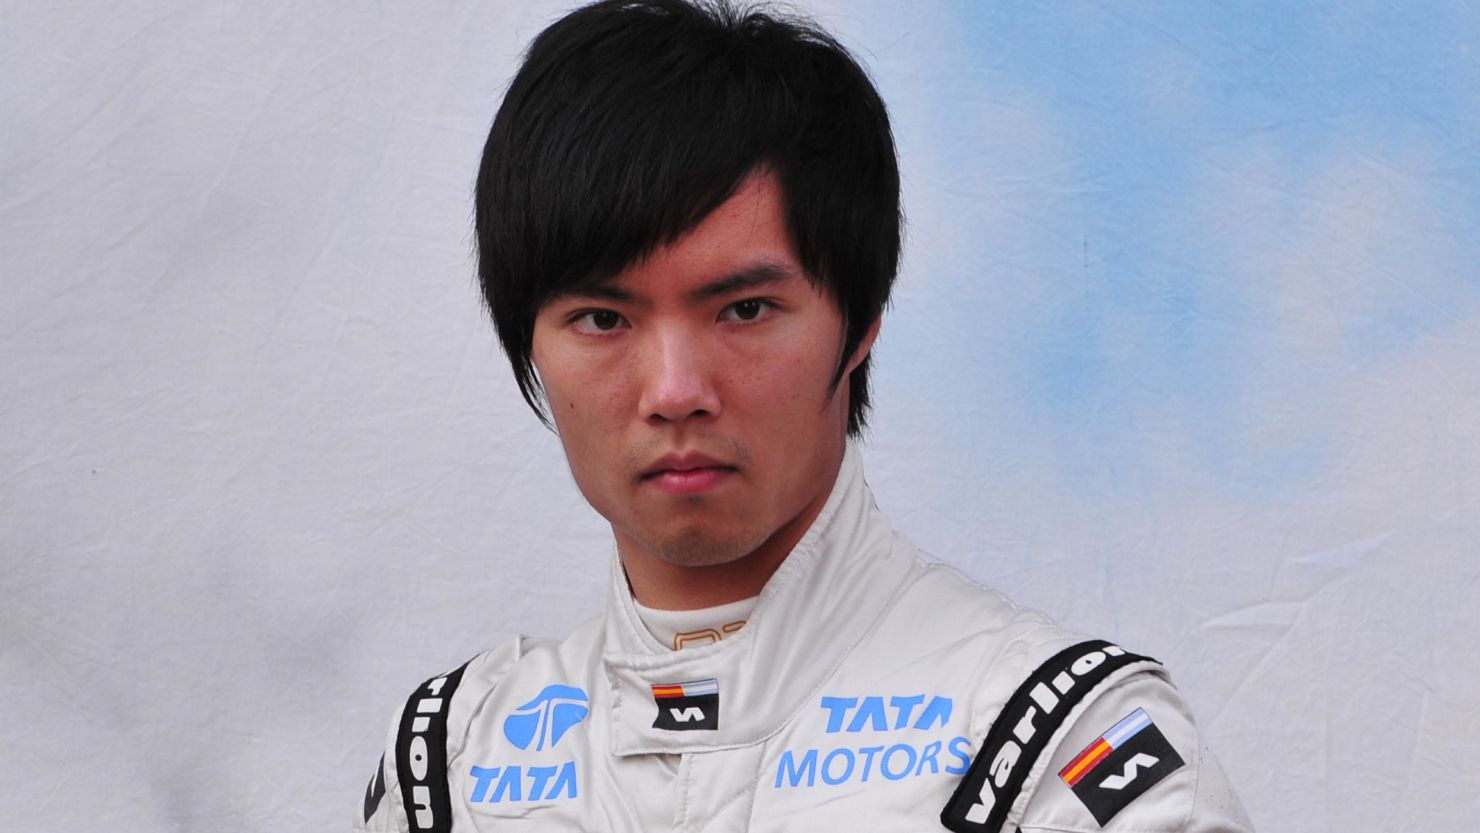 HRT's Chinese test driver Ma Qing Hua will take the wheel in practice for Sunday's Italian Grand Prix.